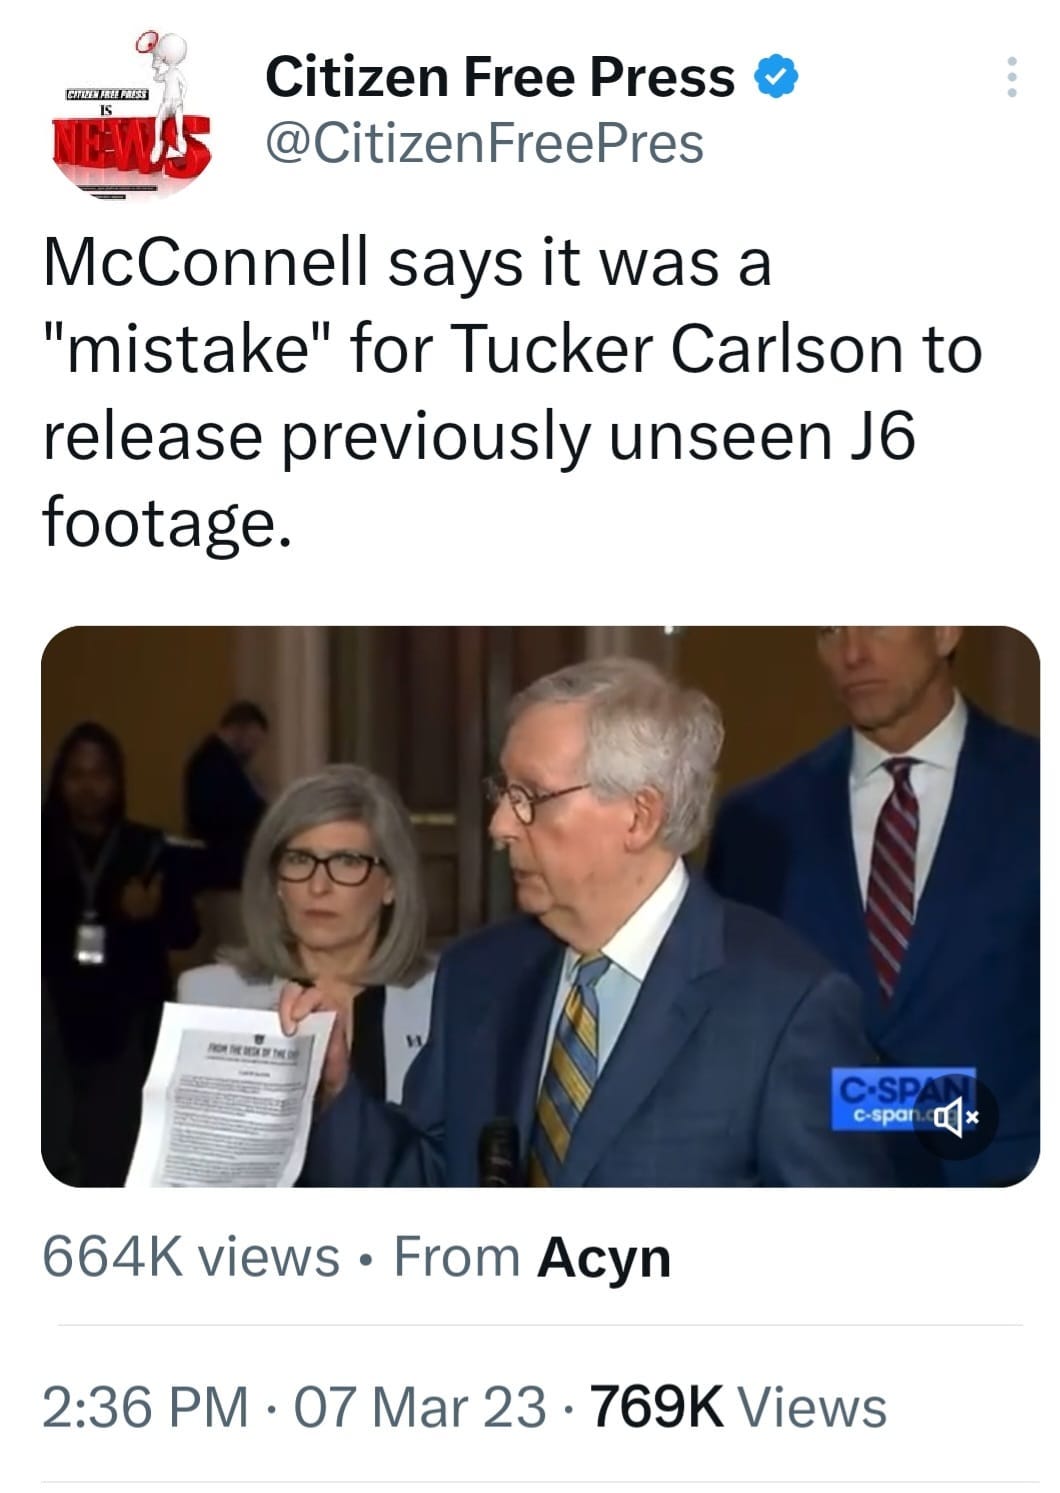 May be an image of 3 people and text that says '7 EWAS Citizen Free Press @CitizenFreePres McConnell says it was a "mistake" for Tucker Carlson to release previously unseen J6 footage. C·SP c-span 664K views From Acyn 2:36 PM 07 Mar 23. 769K Views'